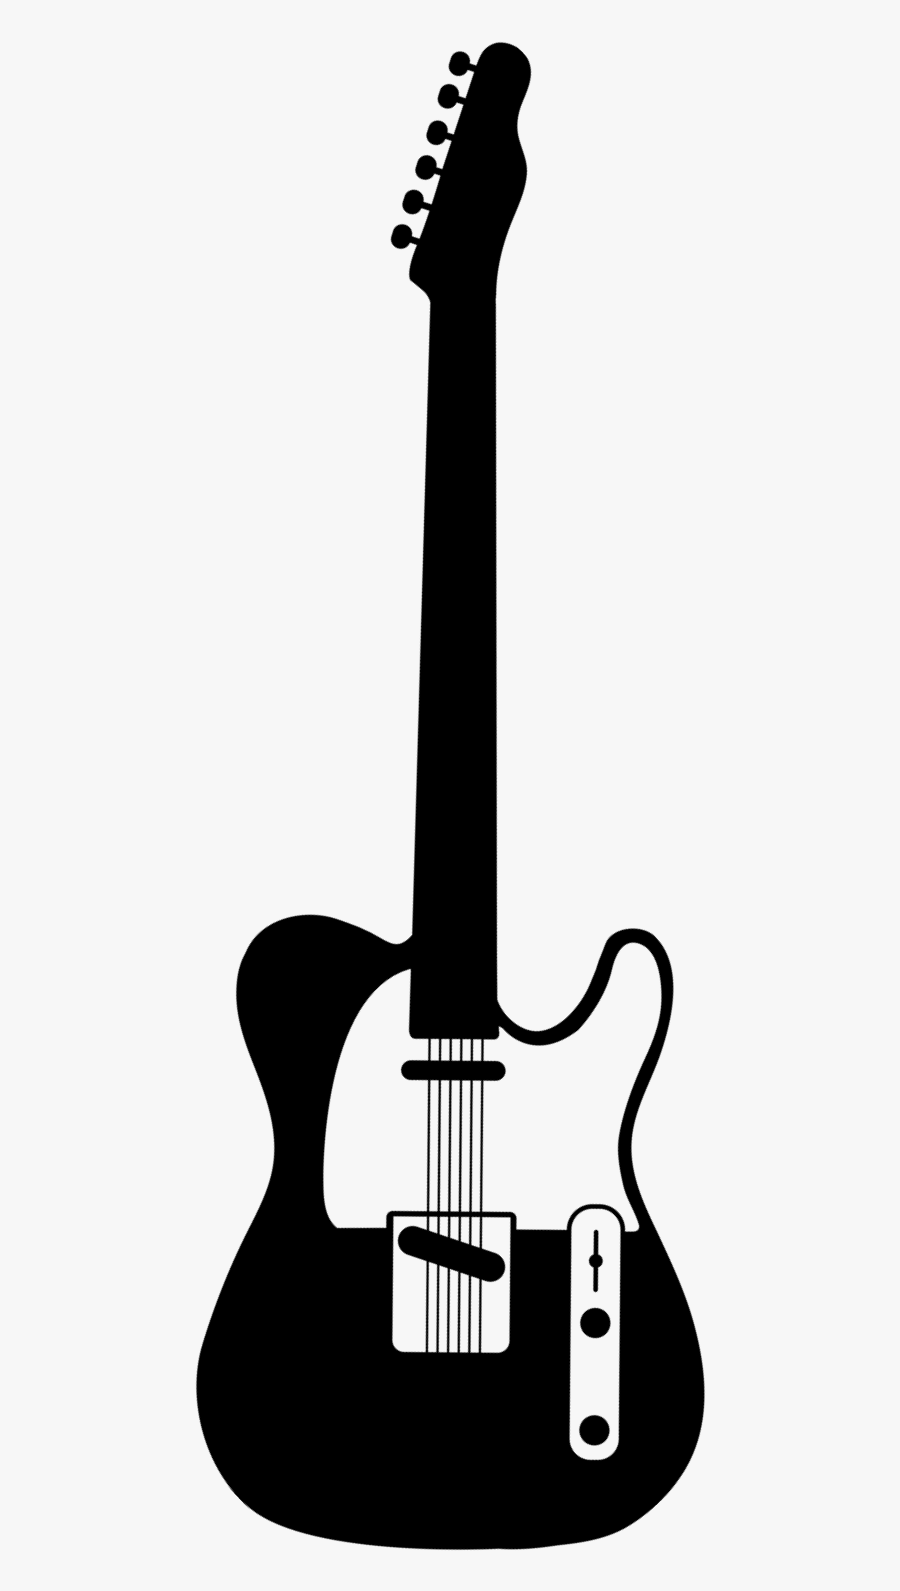 Download Electric Guitar Silhouette : Choose from over a million free vectors, clipart graphics, vector ...